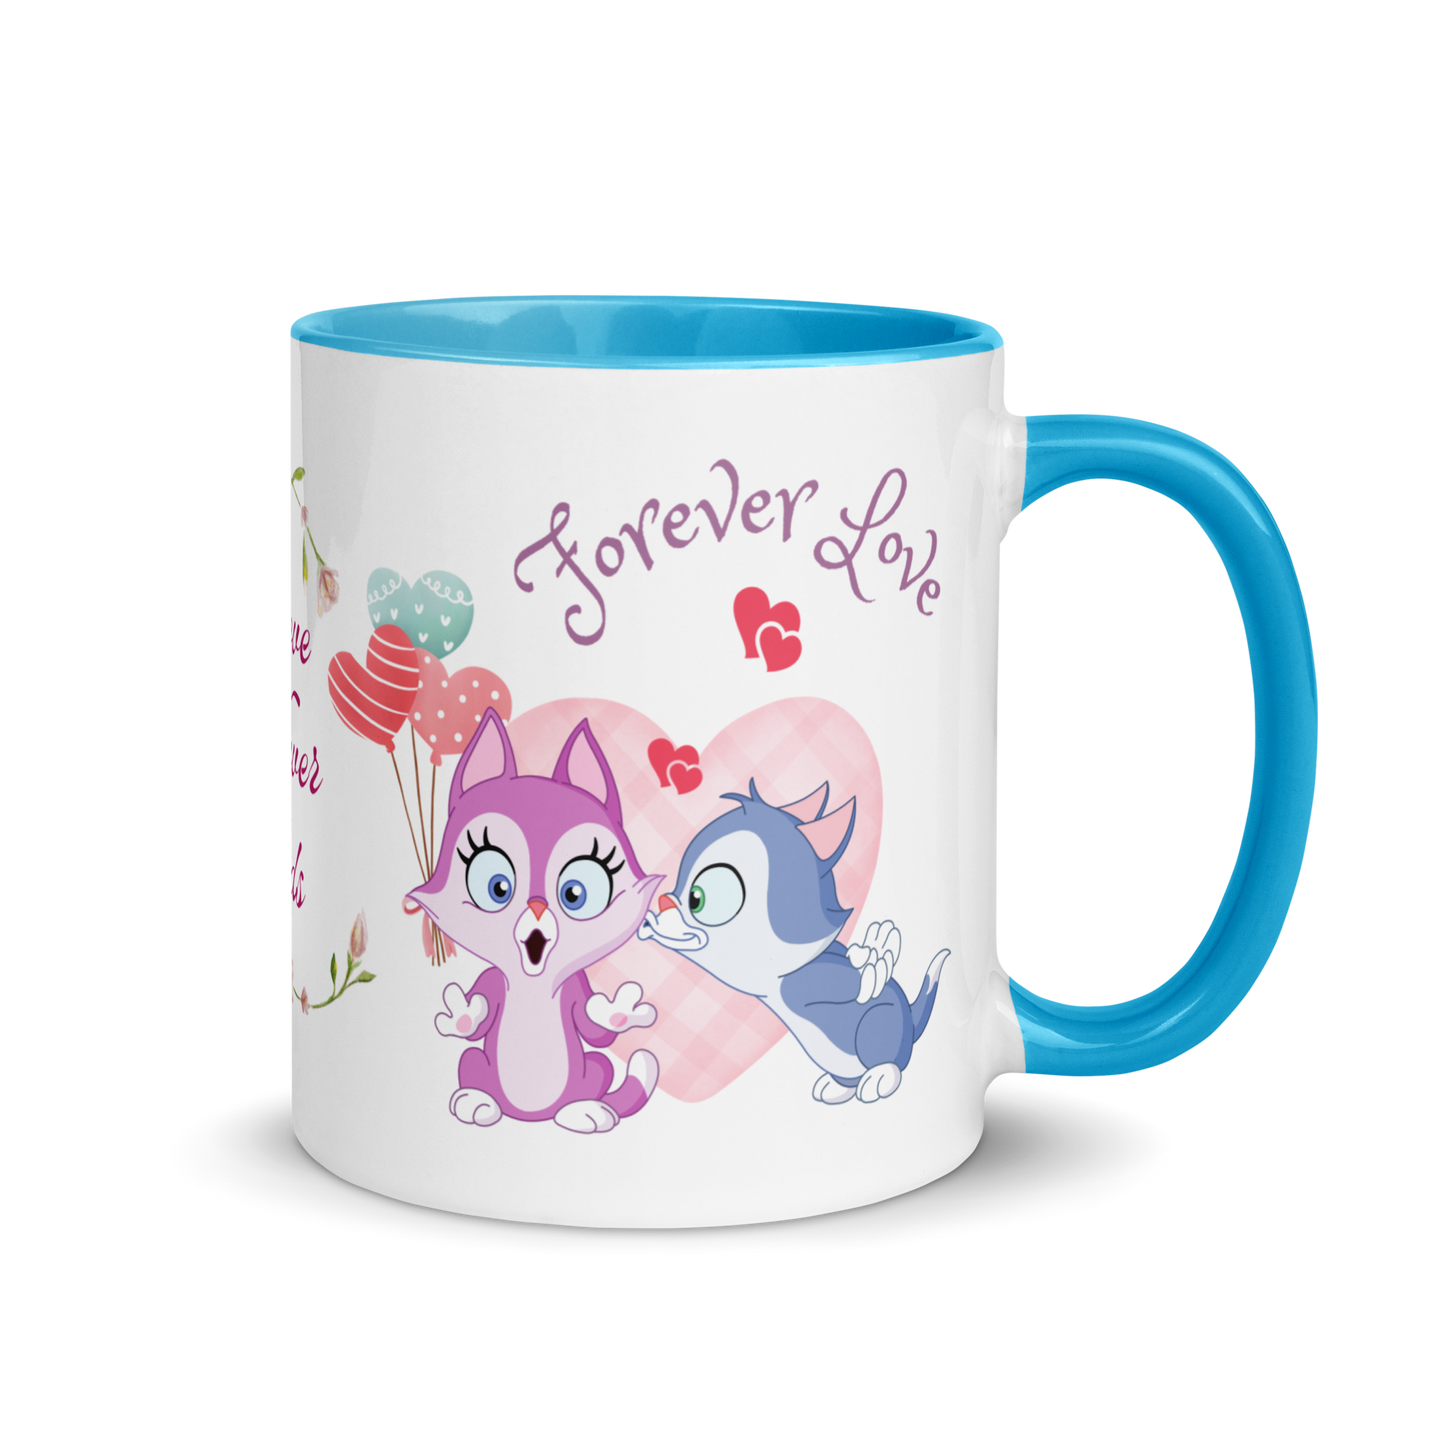 Accent Coffee Mug 11oz | Love Never Ends | Cute Cat Couple Love Themed